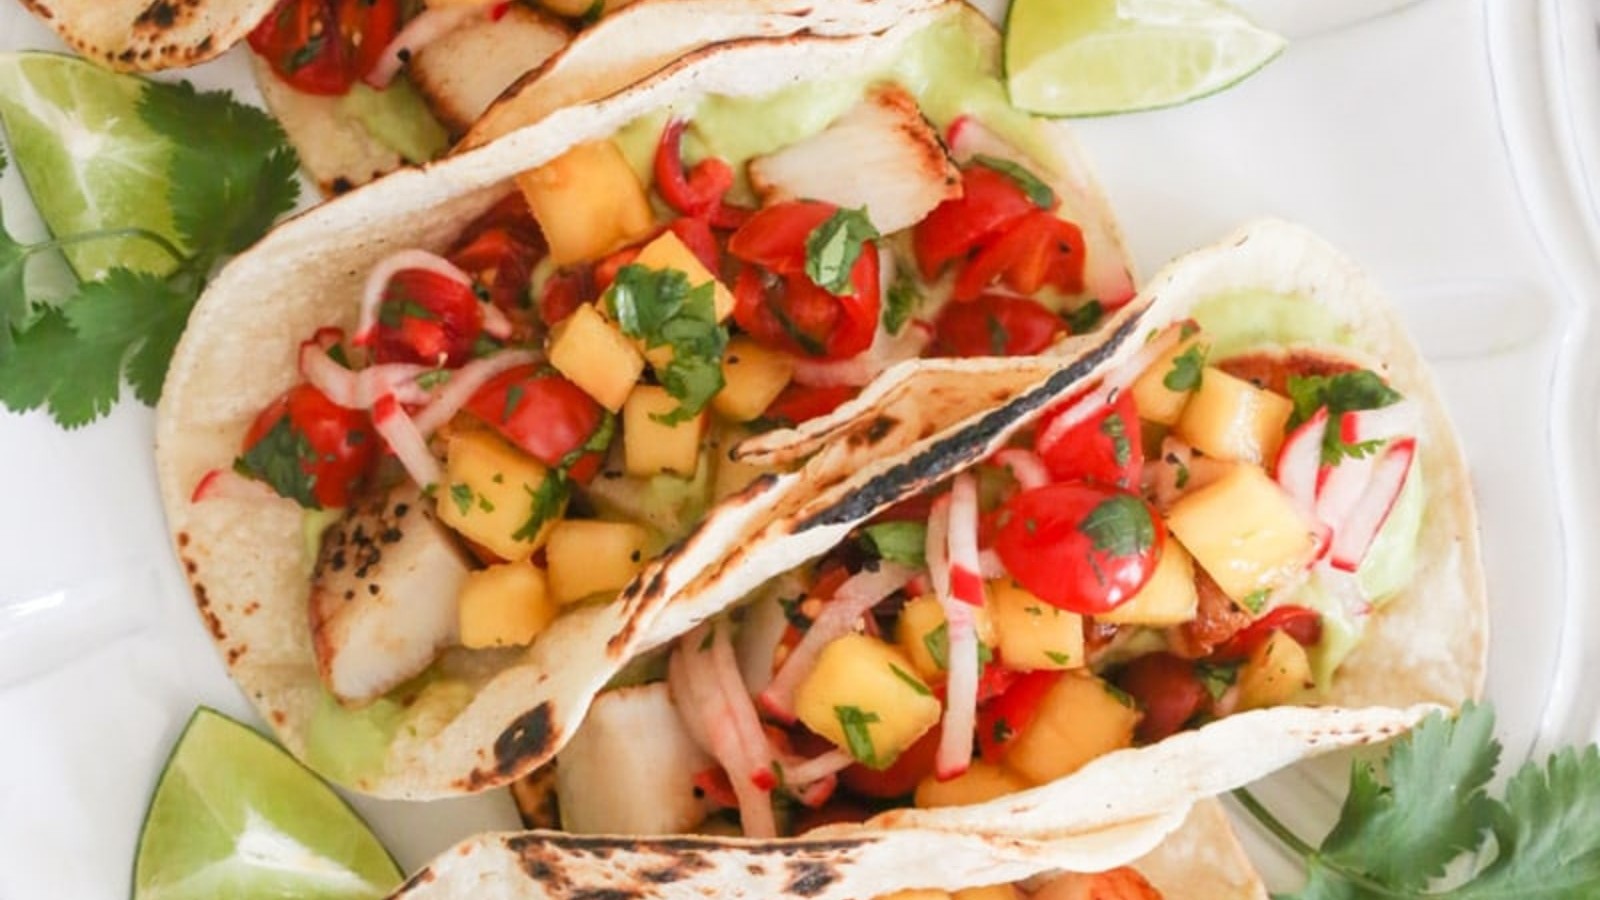 Image of Seared Scallop Tacos with Spring Mango Salsa and Avocado Cream